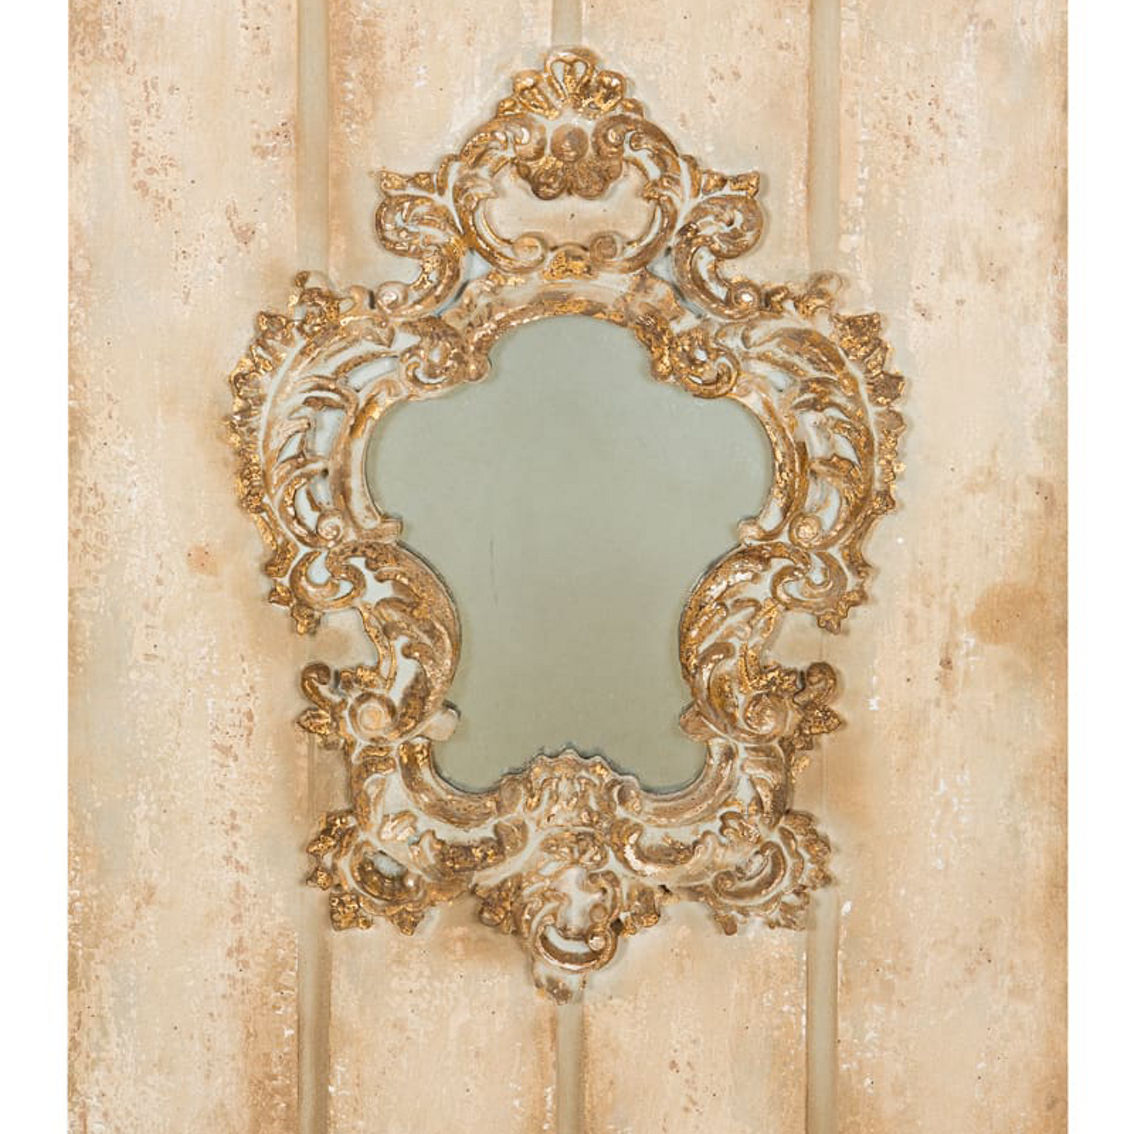 Manor Luxe Vienna Baroque Wood Board & Antiqued Glass Wall Mirror 24''L x 36''H